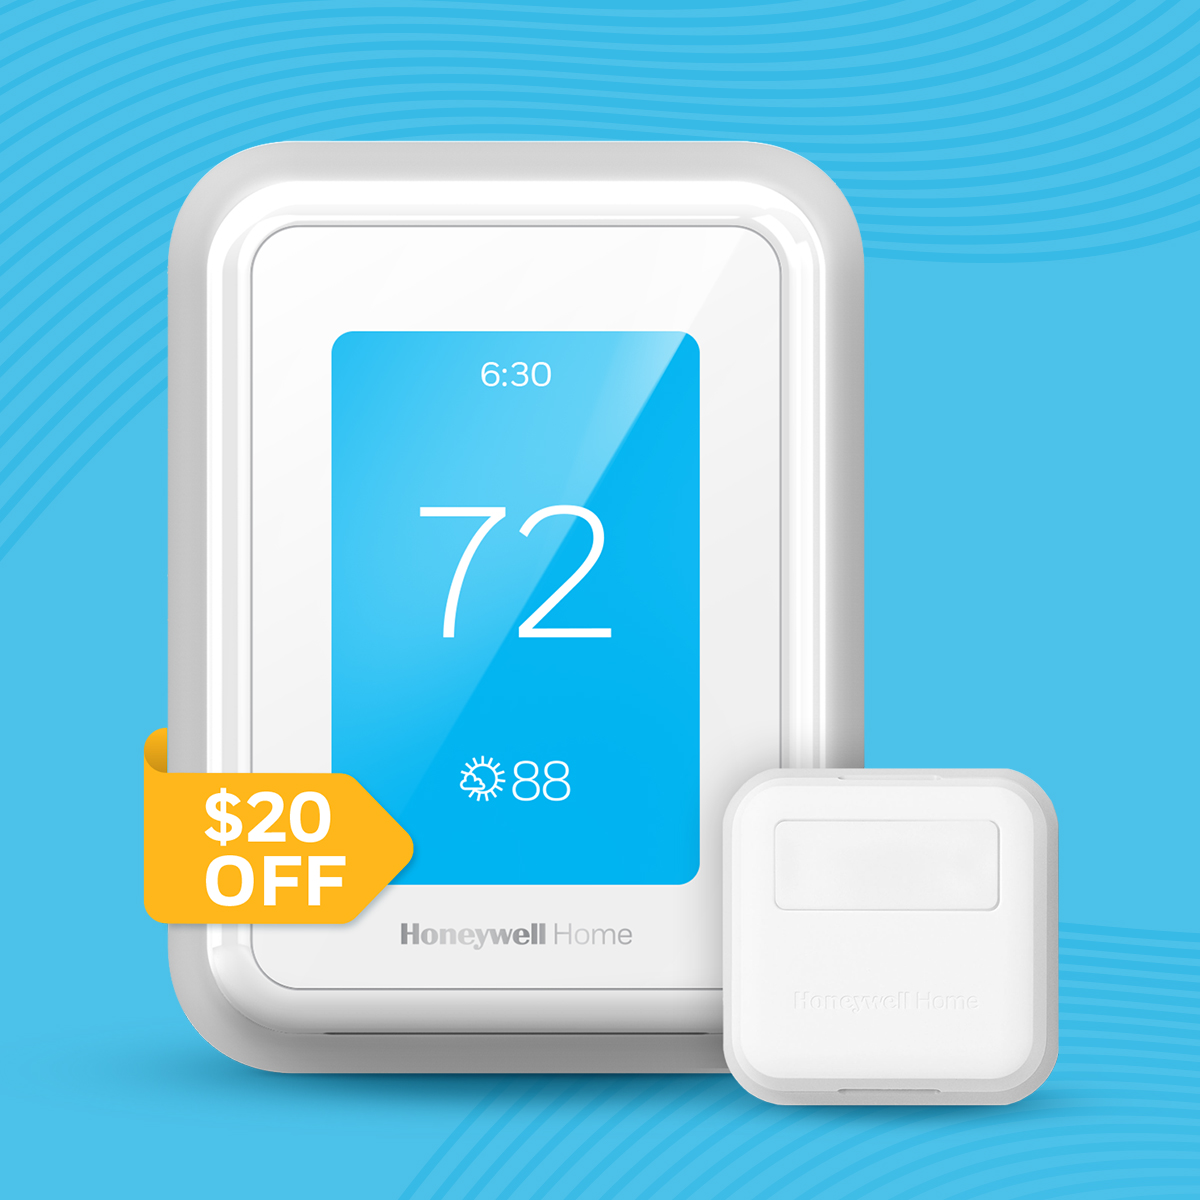 Last chance to save on the easy-to-use T9 Smart Thermostat with Smart Sensor. Act now: hwllhome.co/T9 #smarthome #smartthermostat #sale